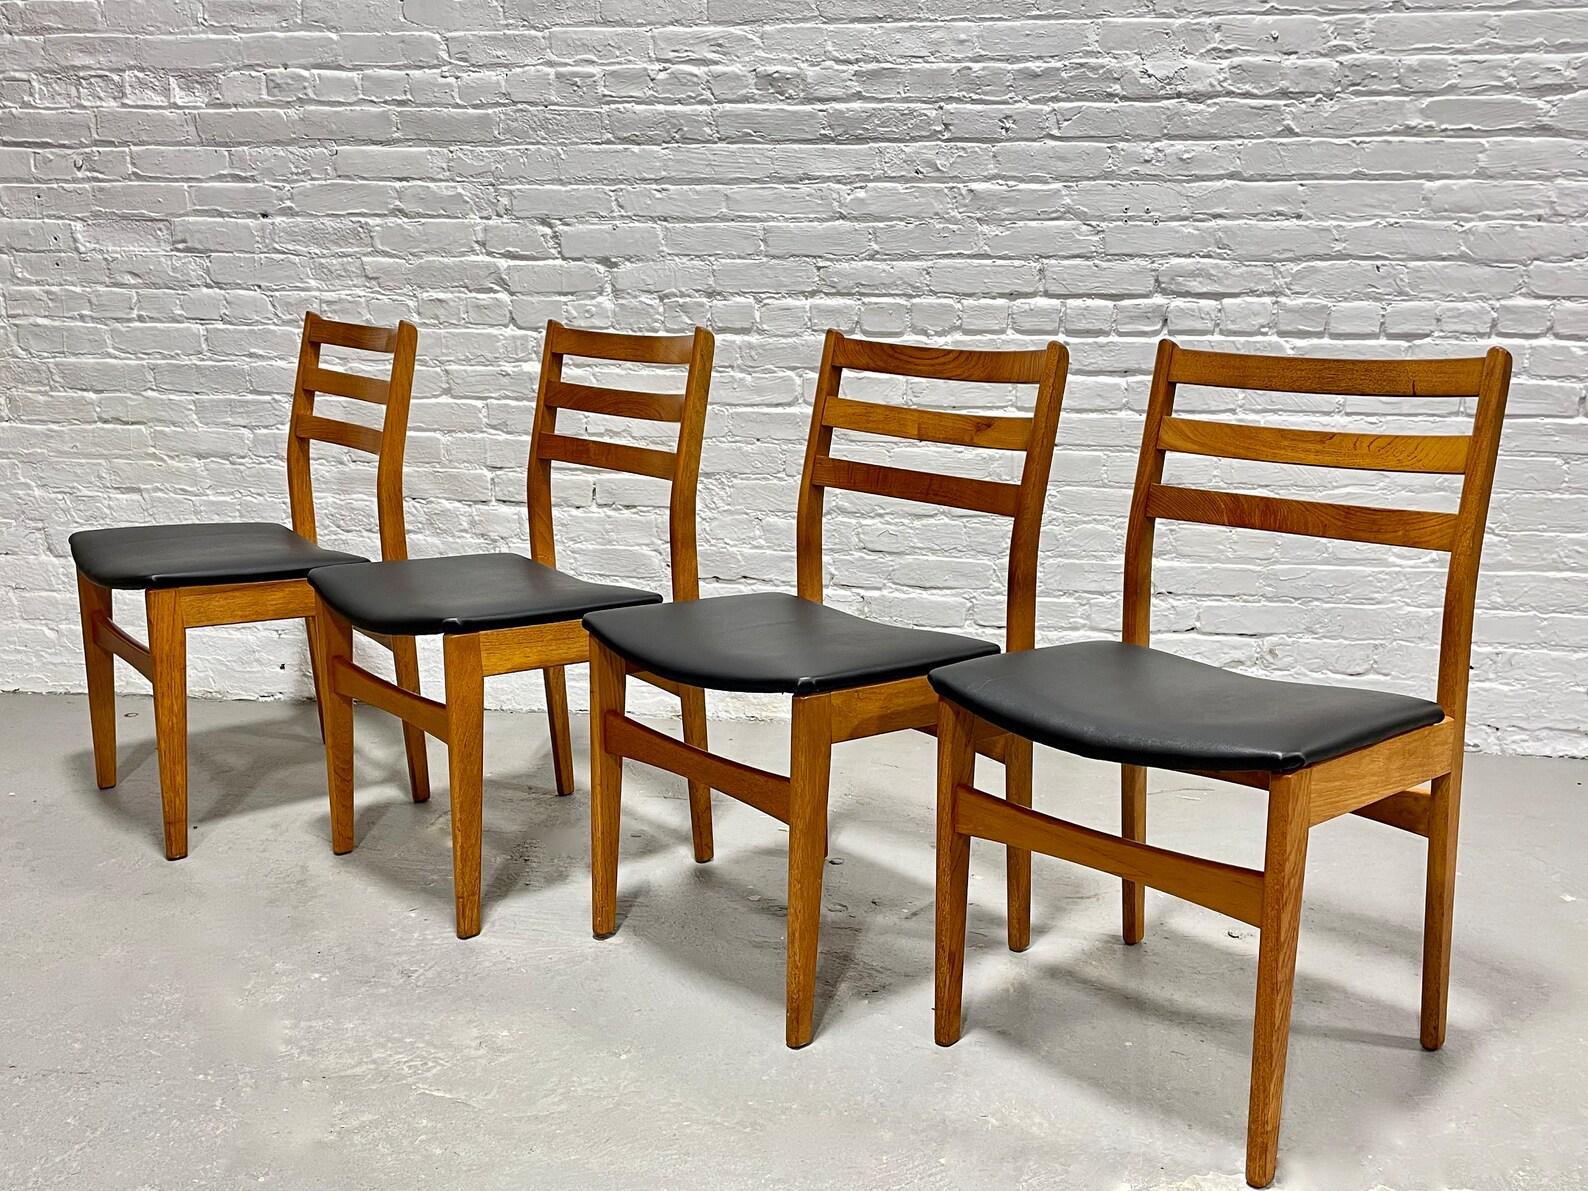 Mid-Century Modern Teak Dining Chairs by Nordic Furniture, Made in Canada, C. 1960s. Frames feature ultra comfortable solid teak backrests. The chairs were newly upholstered with black Naugahyde which easily matches with anything and is easy to wipe